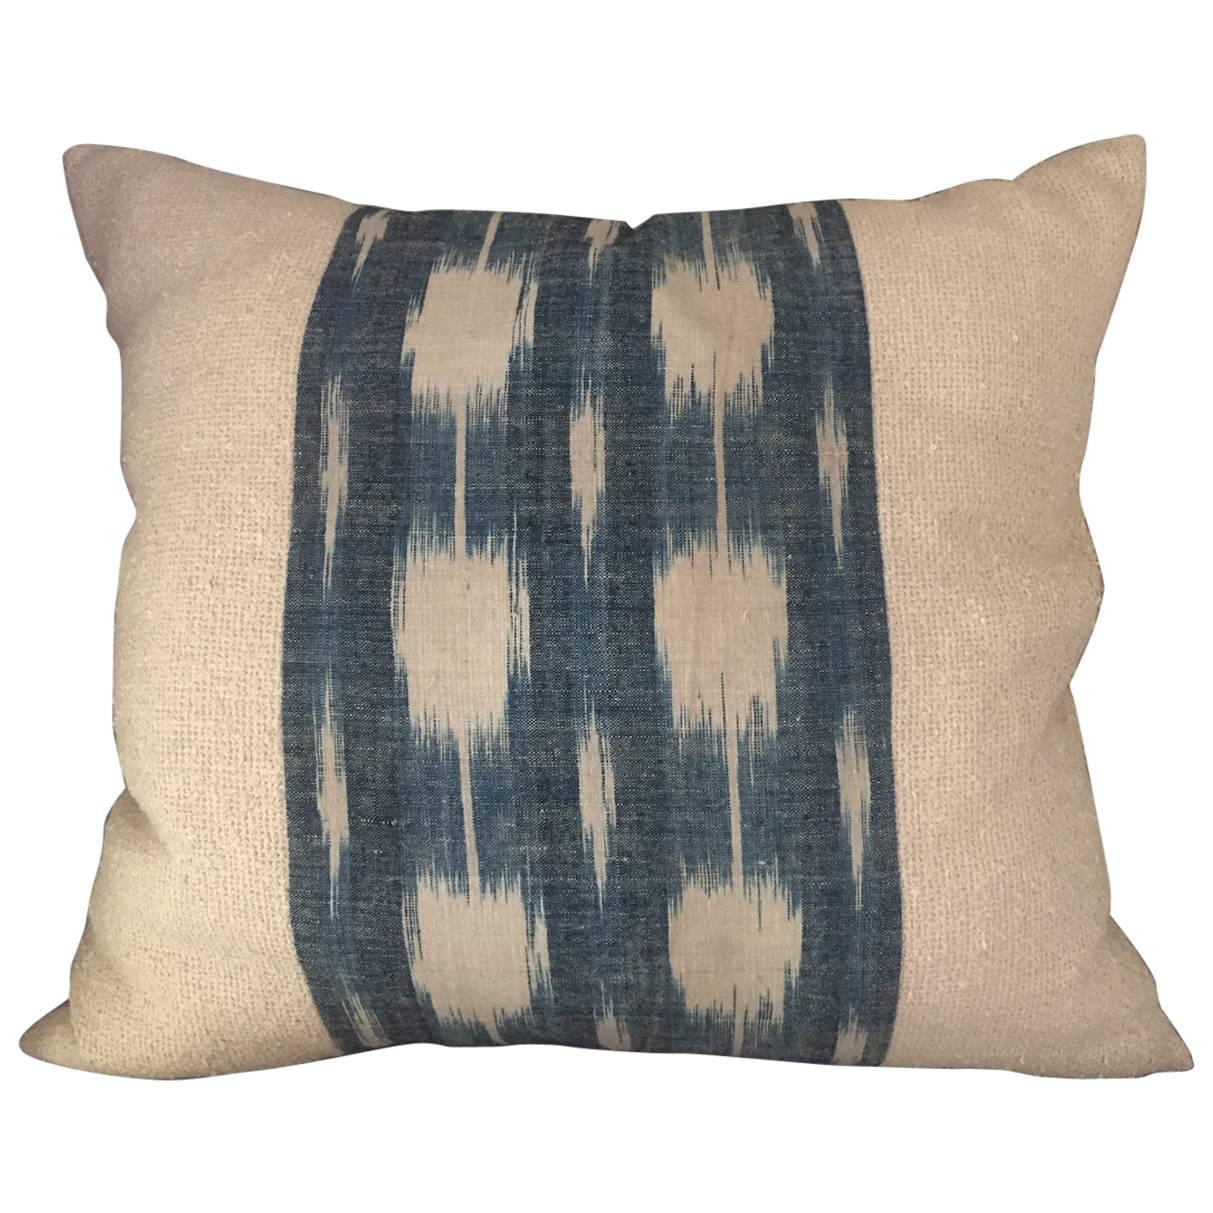 Mid-19th Century French Home Spun Indigo Dyed Ikat Pillow #6 For Sale